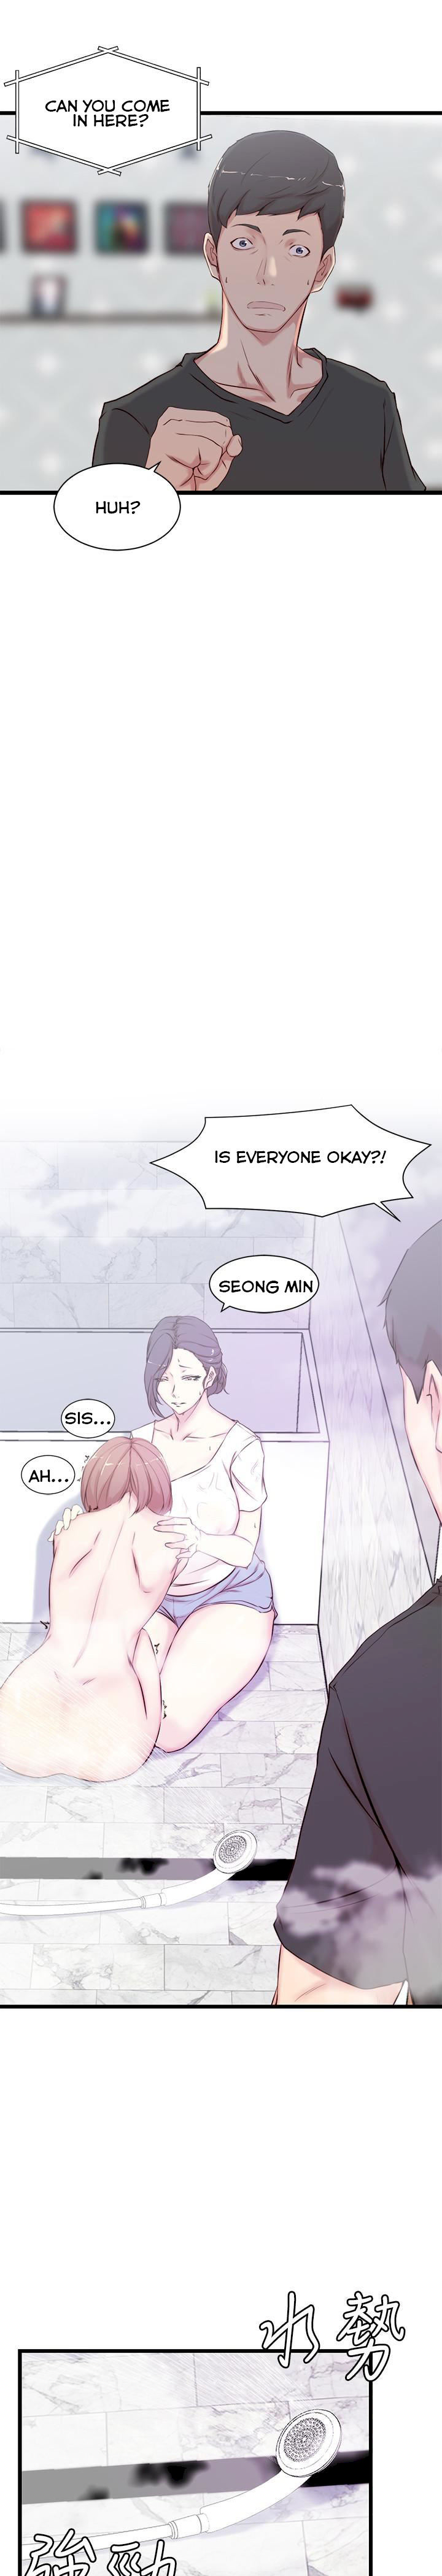 Sister In Law (Kim Jol Gu) - Chapter 2 Page 12